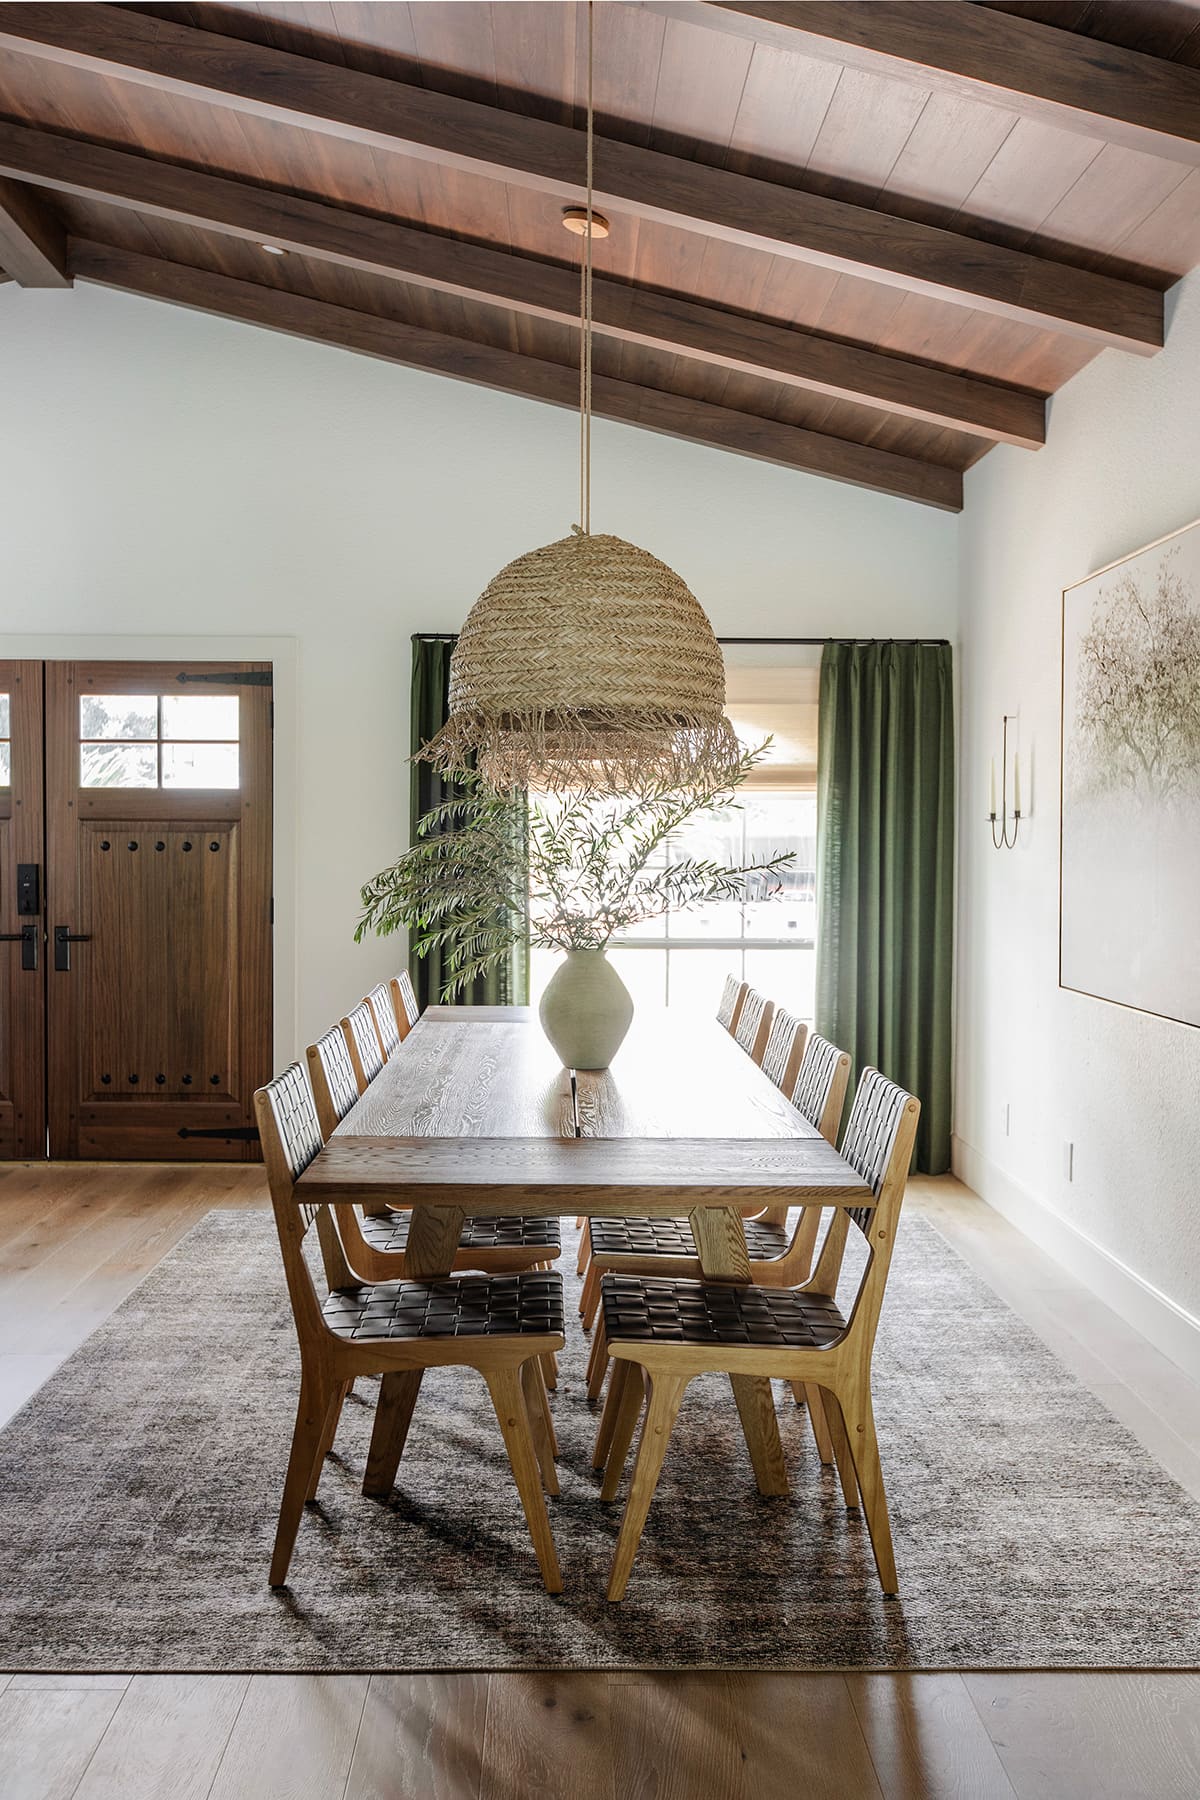 mediterranean style dining room with wood beam ceilings, large table, seagrass pendant lights